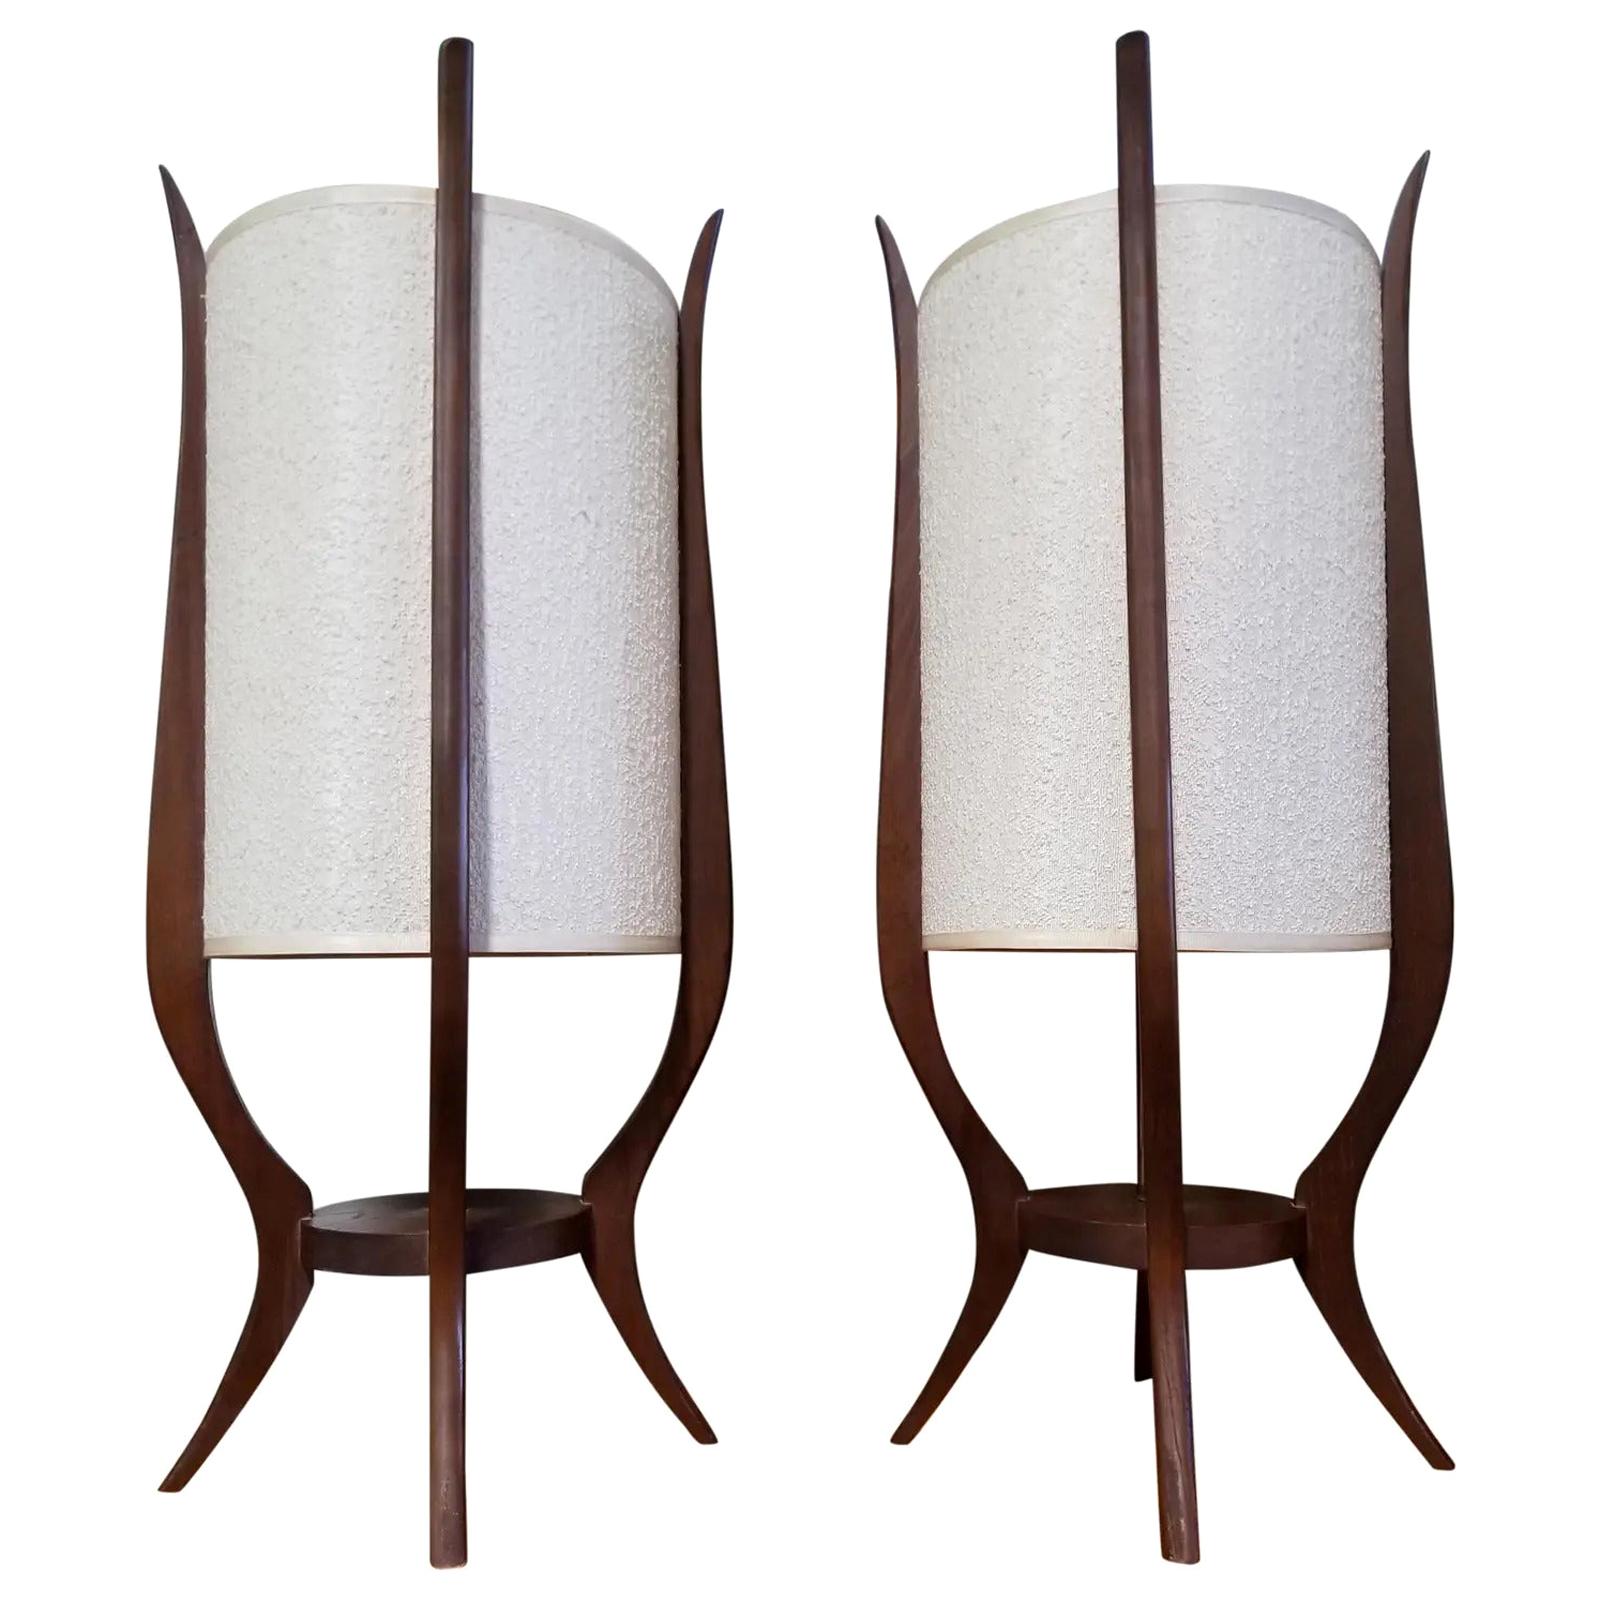 Midcentury Sculpted Wood Lamps by Modeline, a Pair